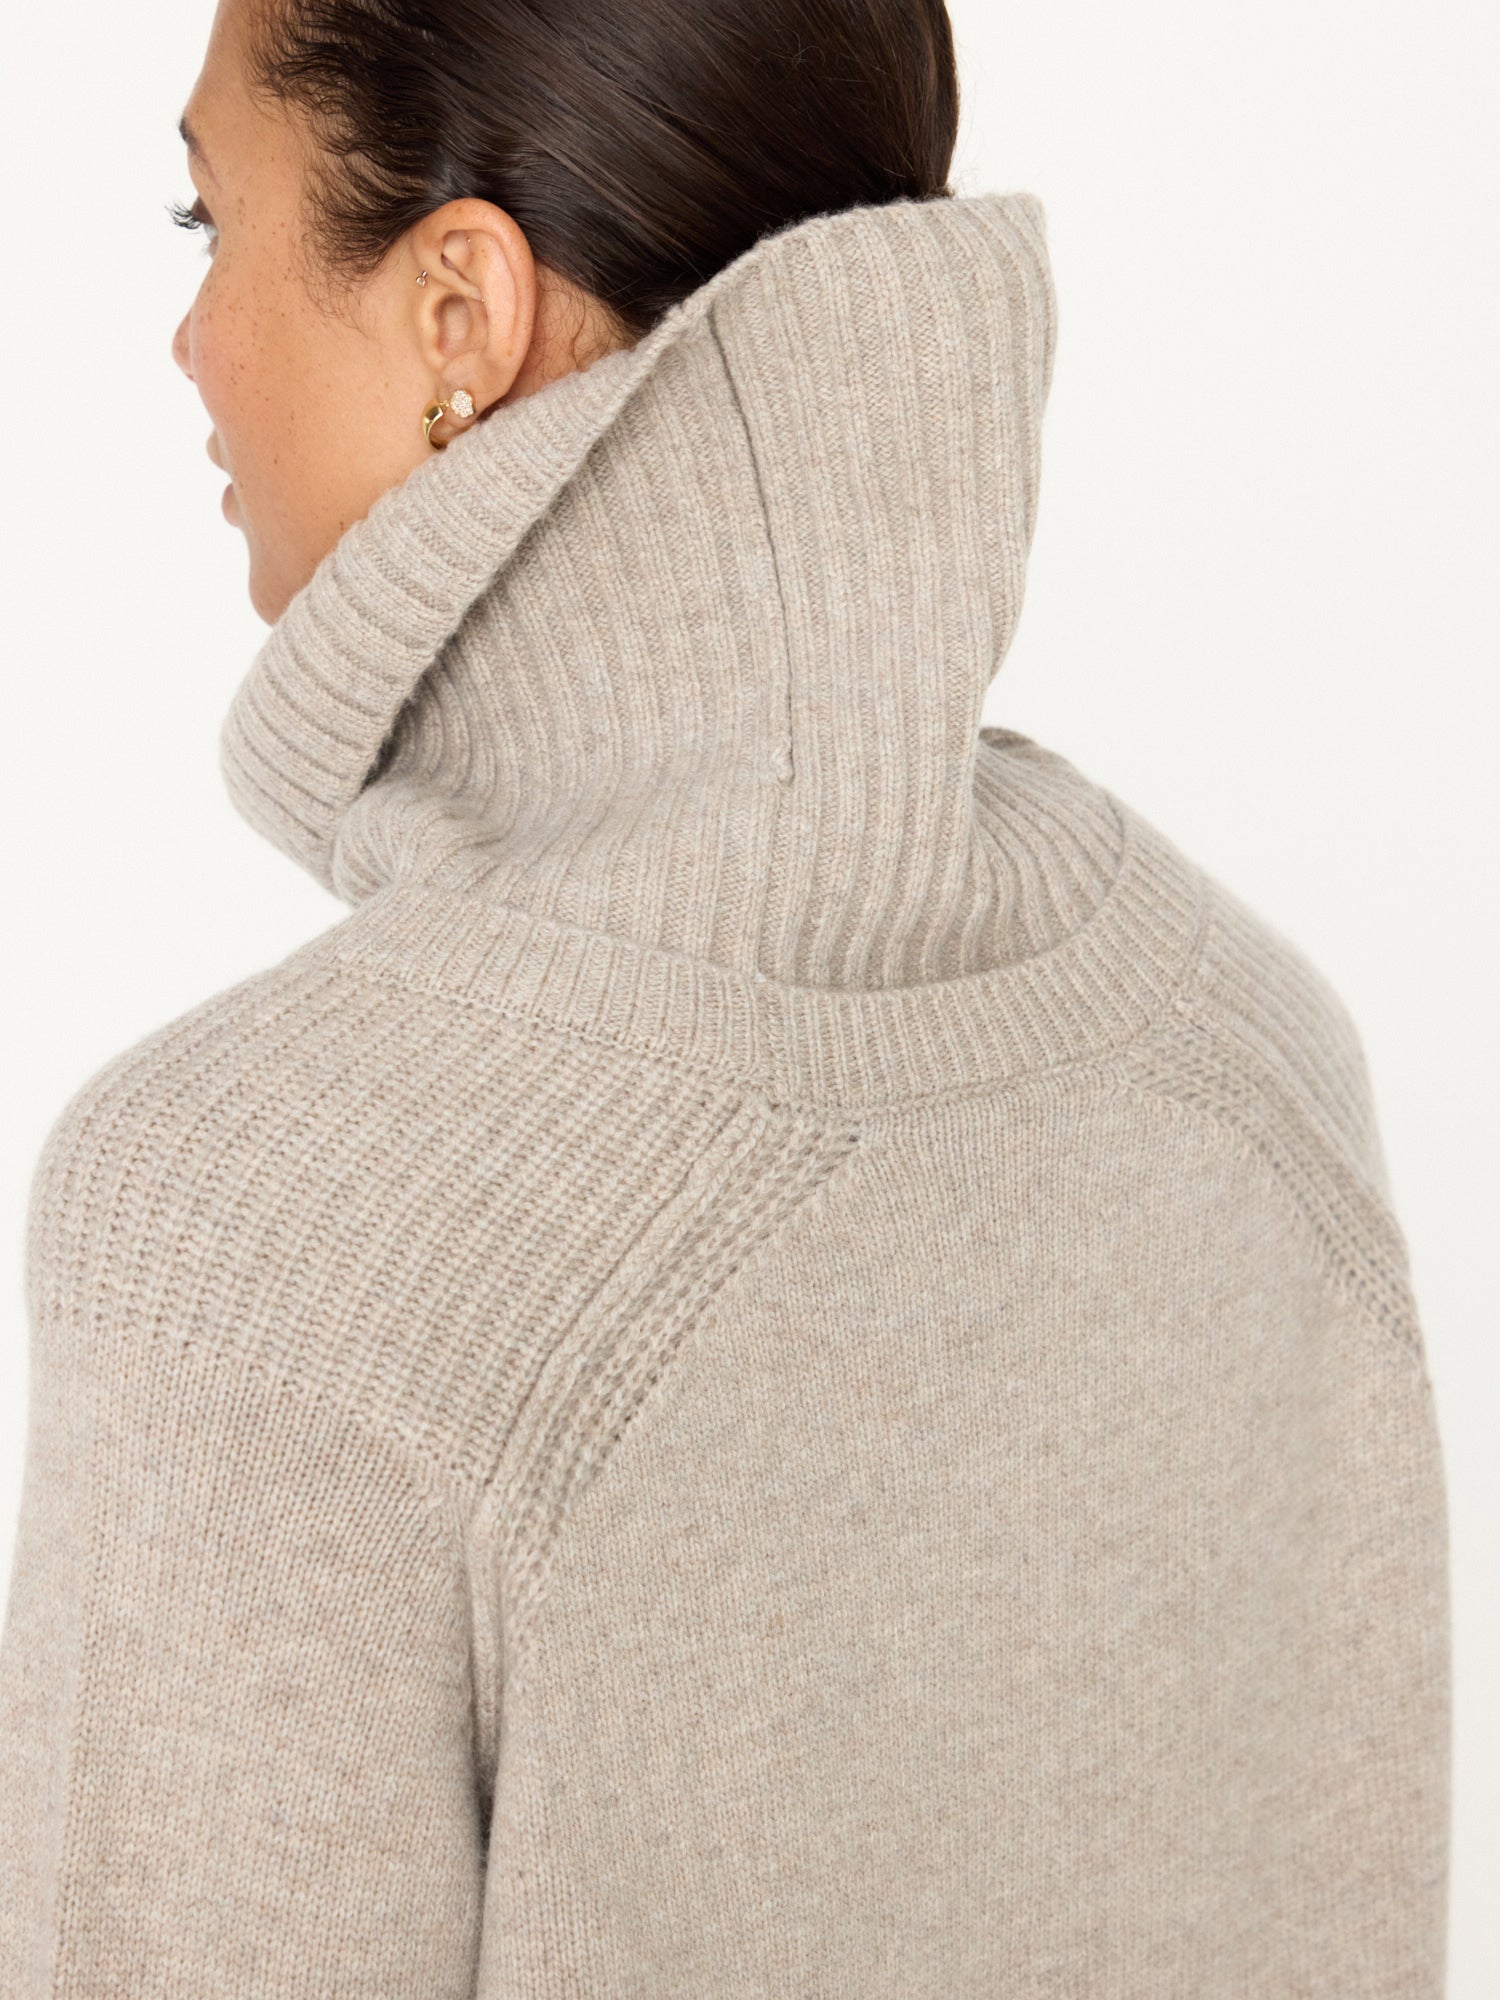 Orion cashmere-wool light grey turtleneck sweater close up